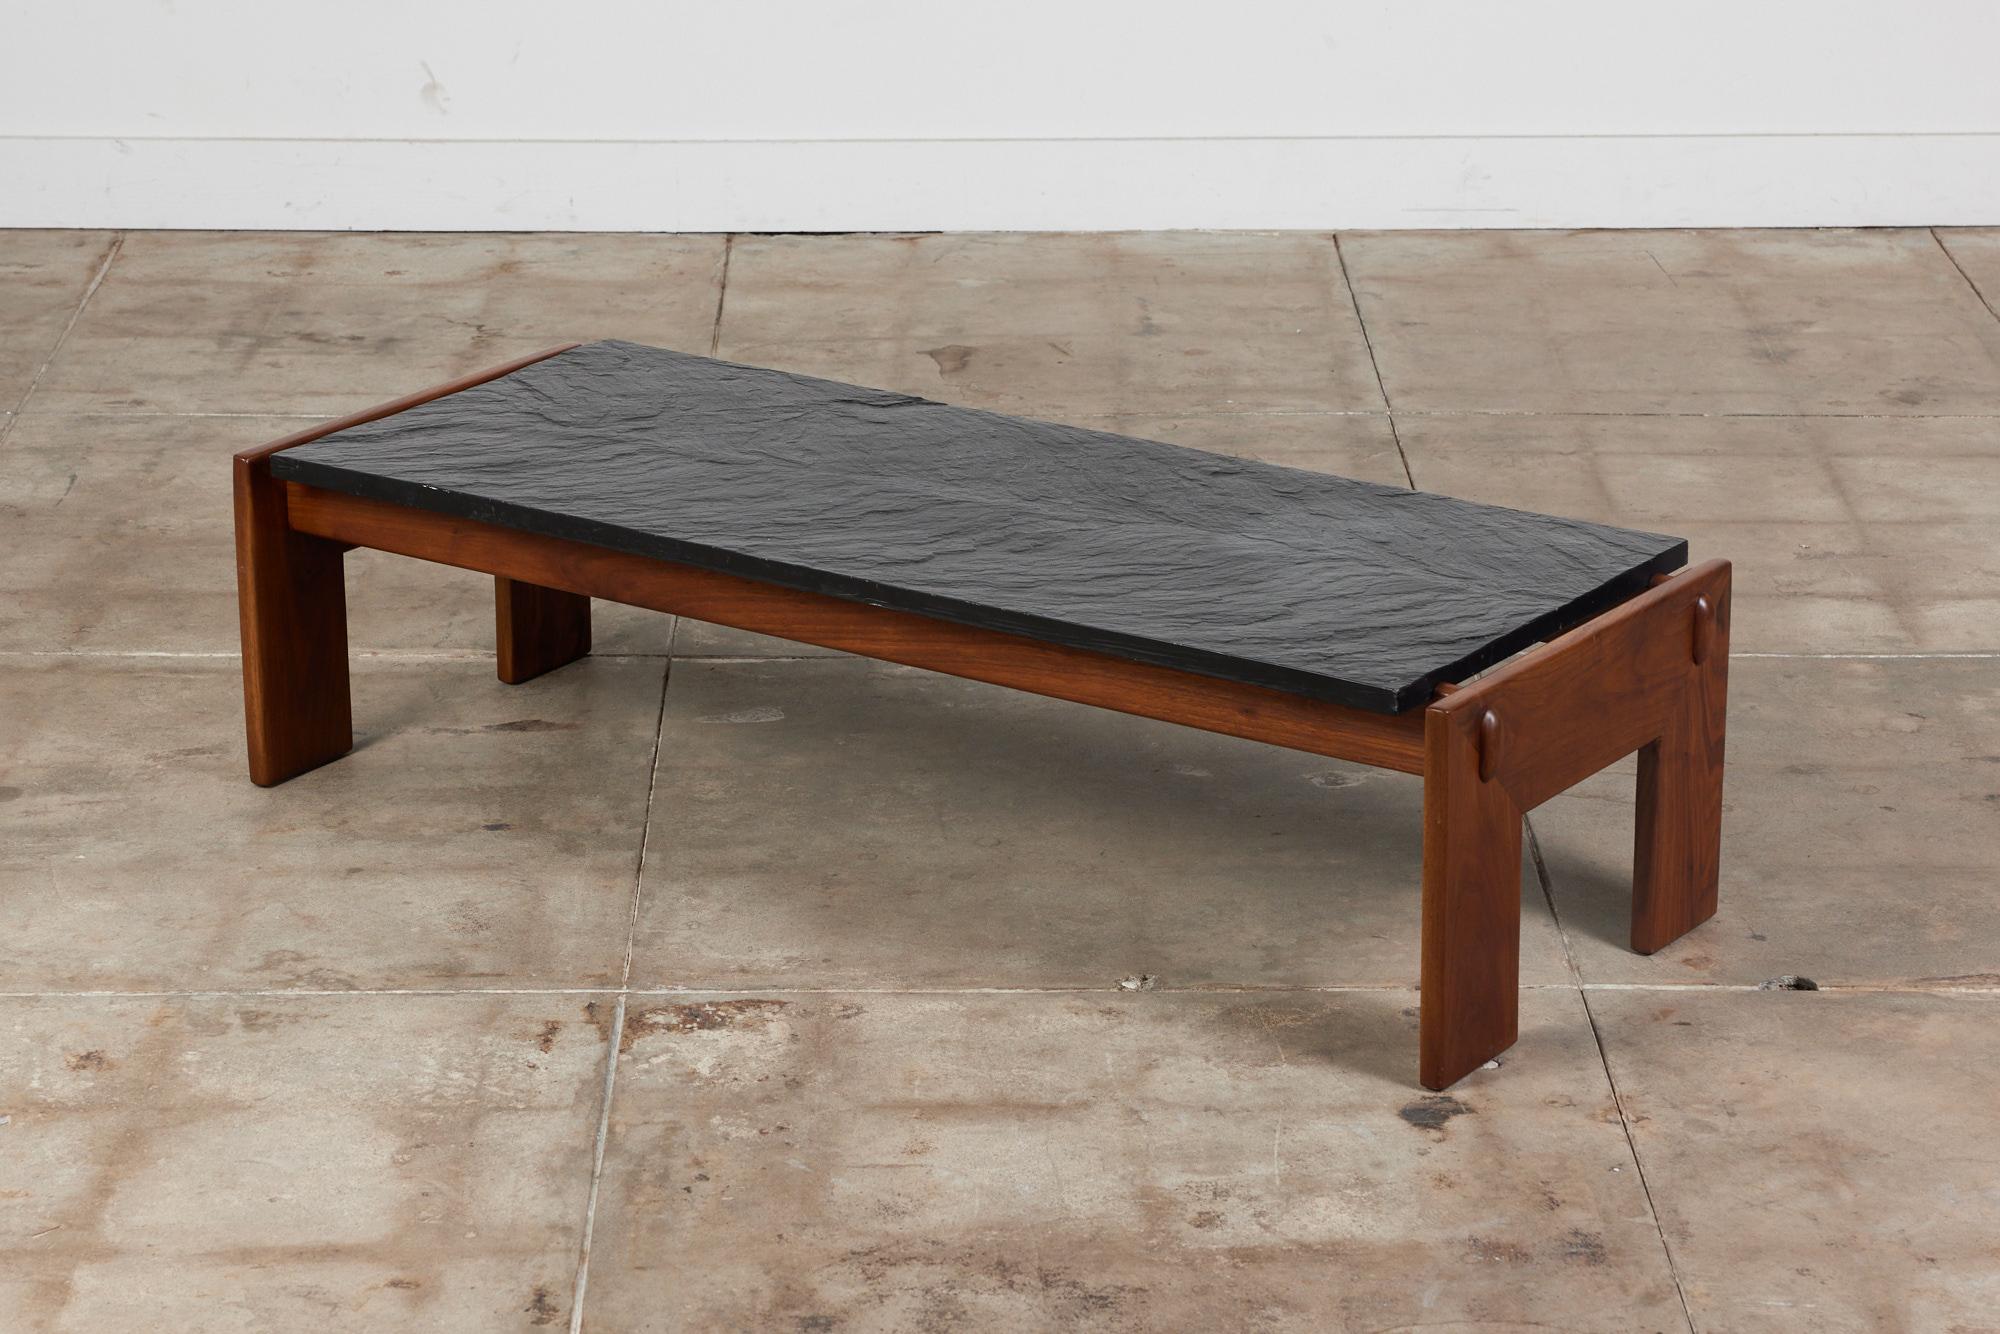 Adrian Pearsall for Craft Associates c.1960s, USA. This rectangular coffee table features a textured slate table top and beautifully refinished walnut base. The combination of the two organic elements makes this brutalist design a statement in any